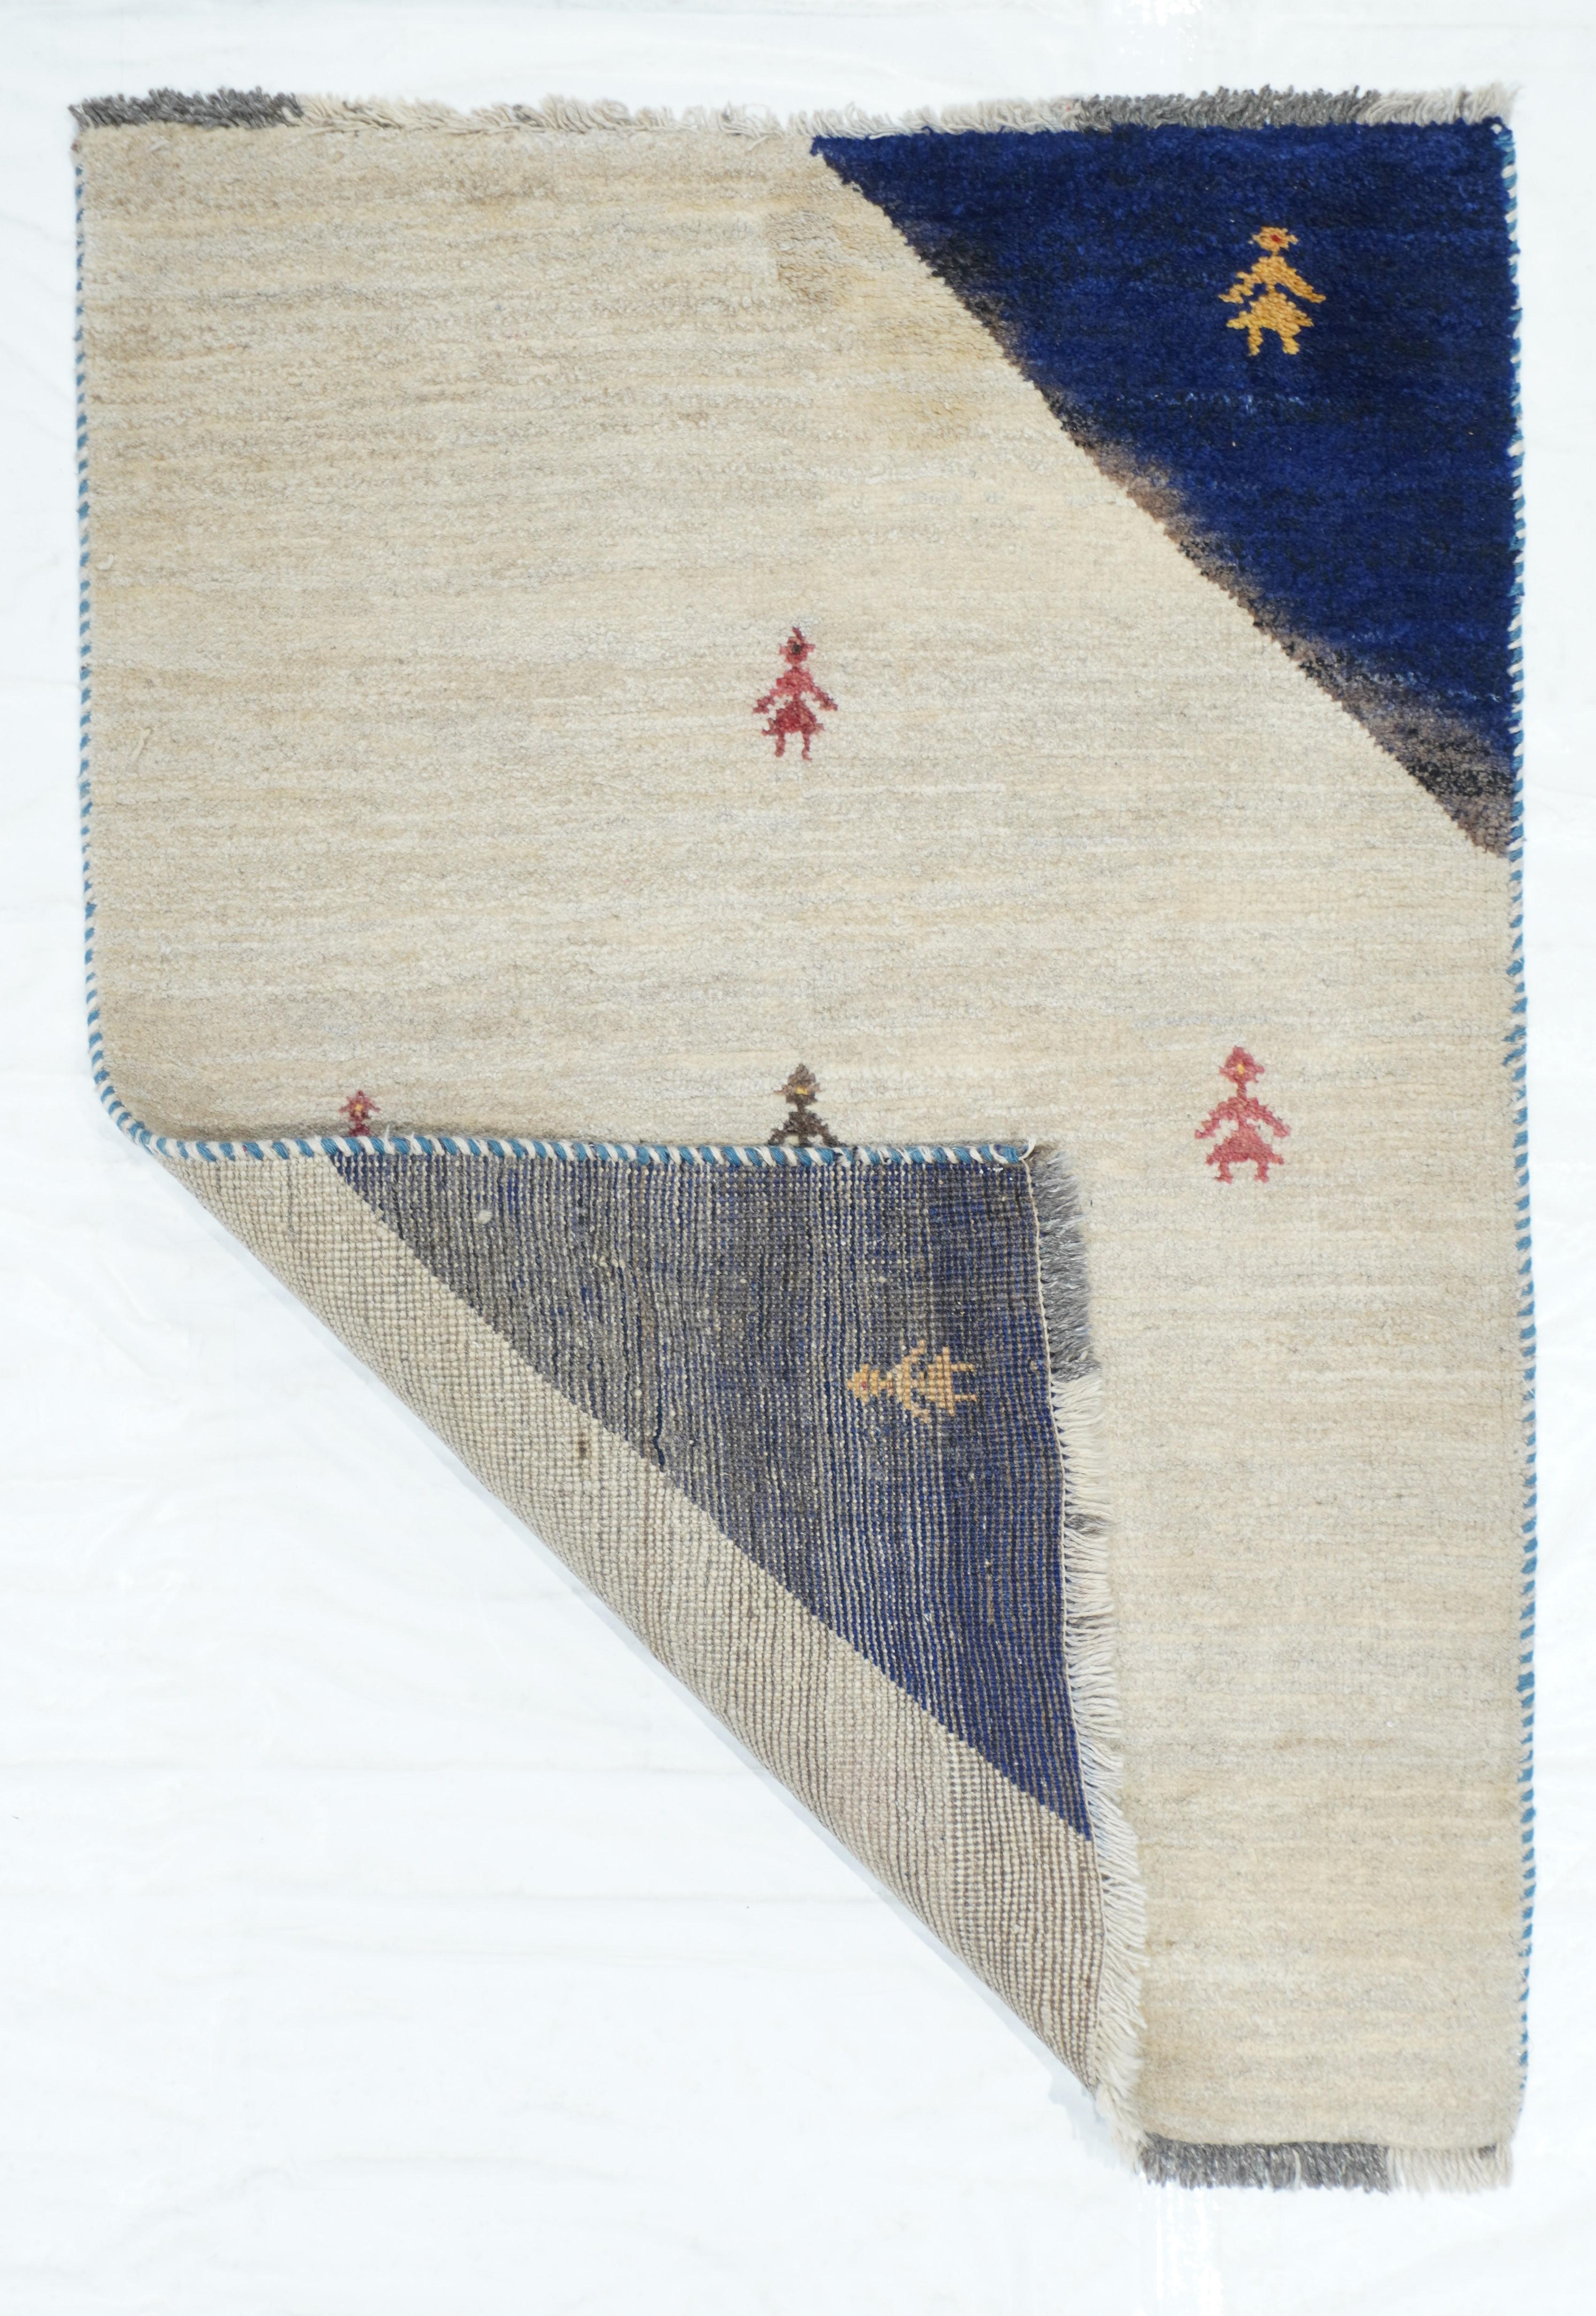 This bold SW Persian nomadic borderless scatter shows two opposing abrashed royal blue corners setting forth a natural ivory broad diagonal section. Seven female stick figures add to the rustic delight. Exceptional piece of abstract art, rustic or